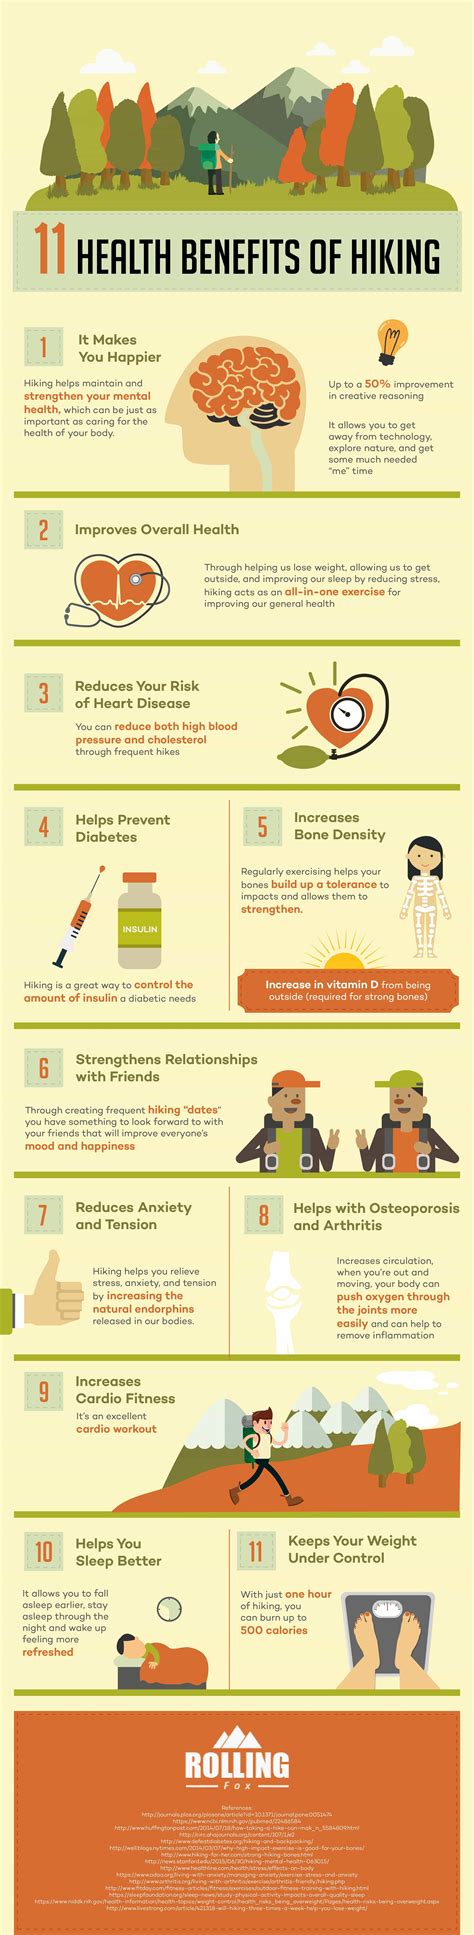 11 Health Benefits Of Hiking Infographic